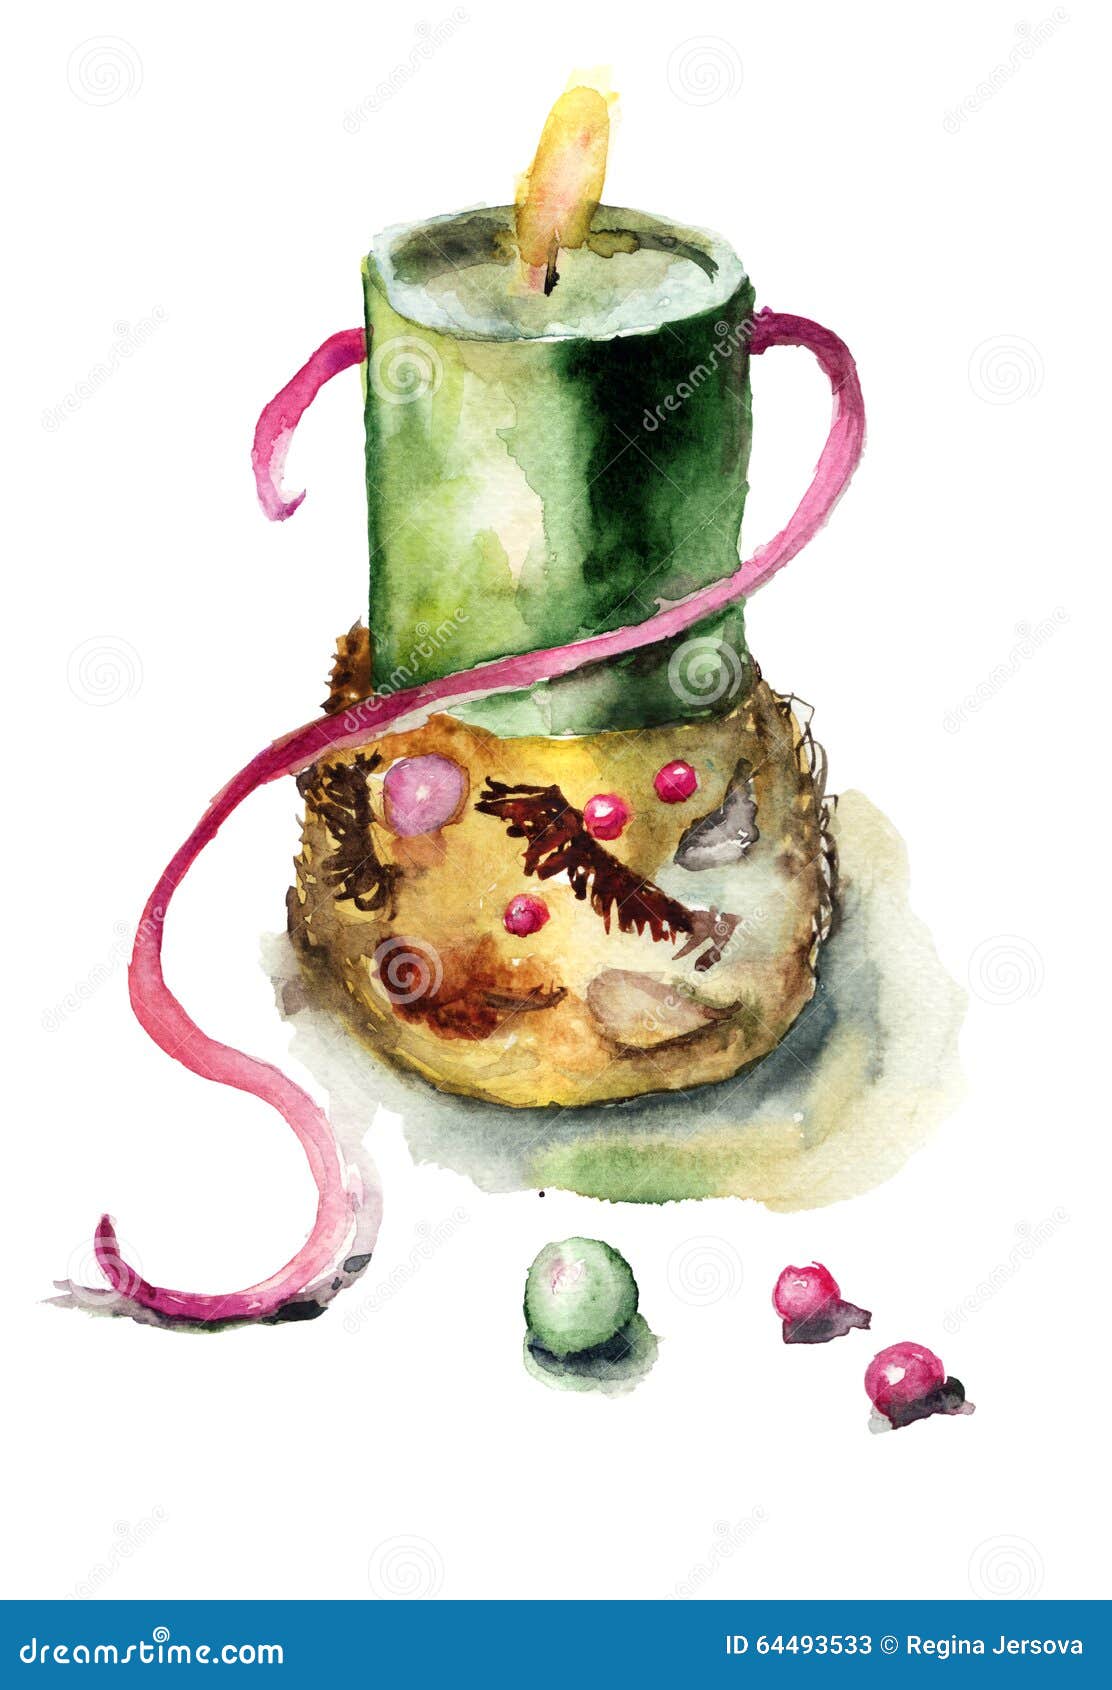 Decorative card with candle, watercolor illustration